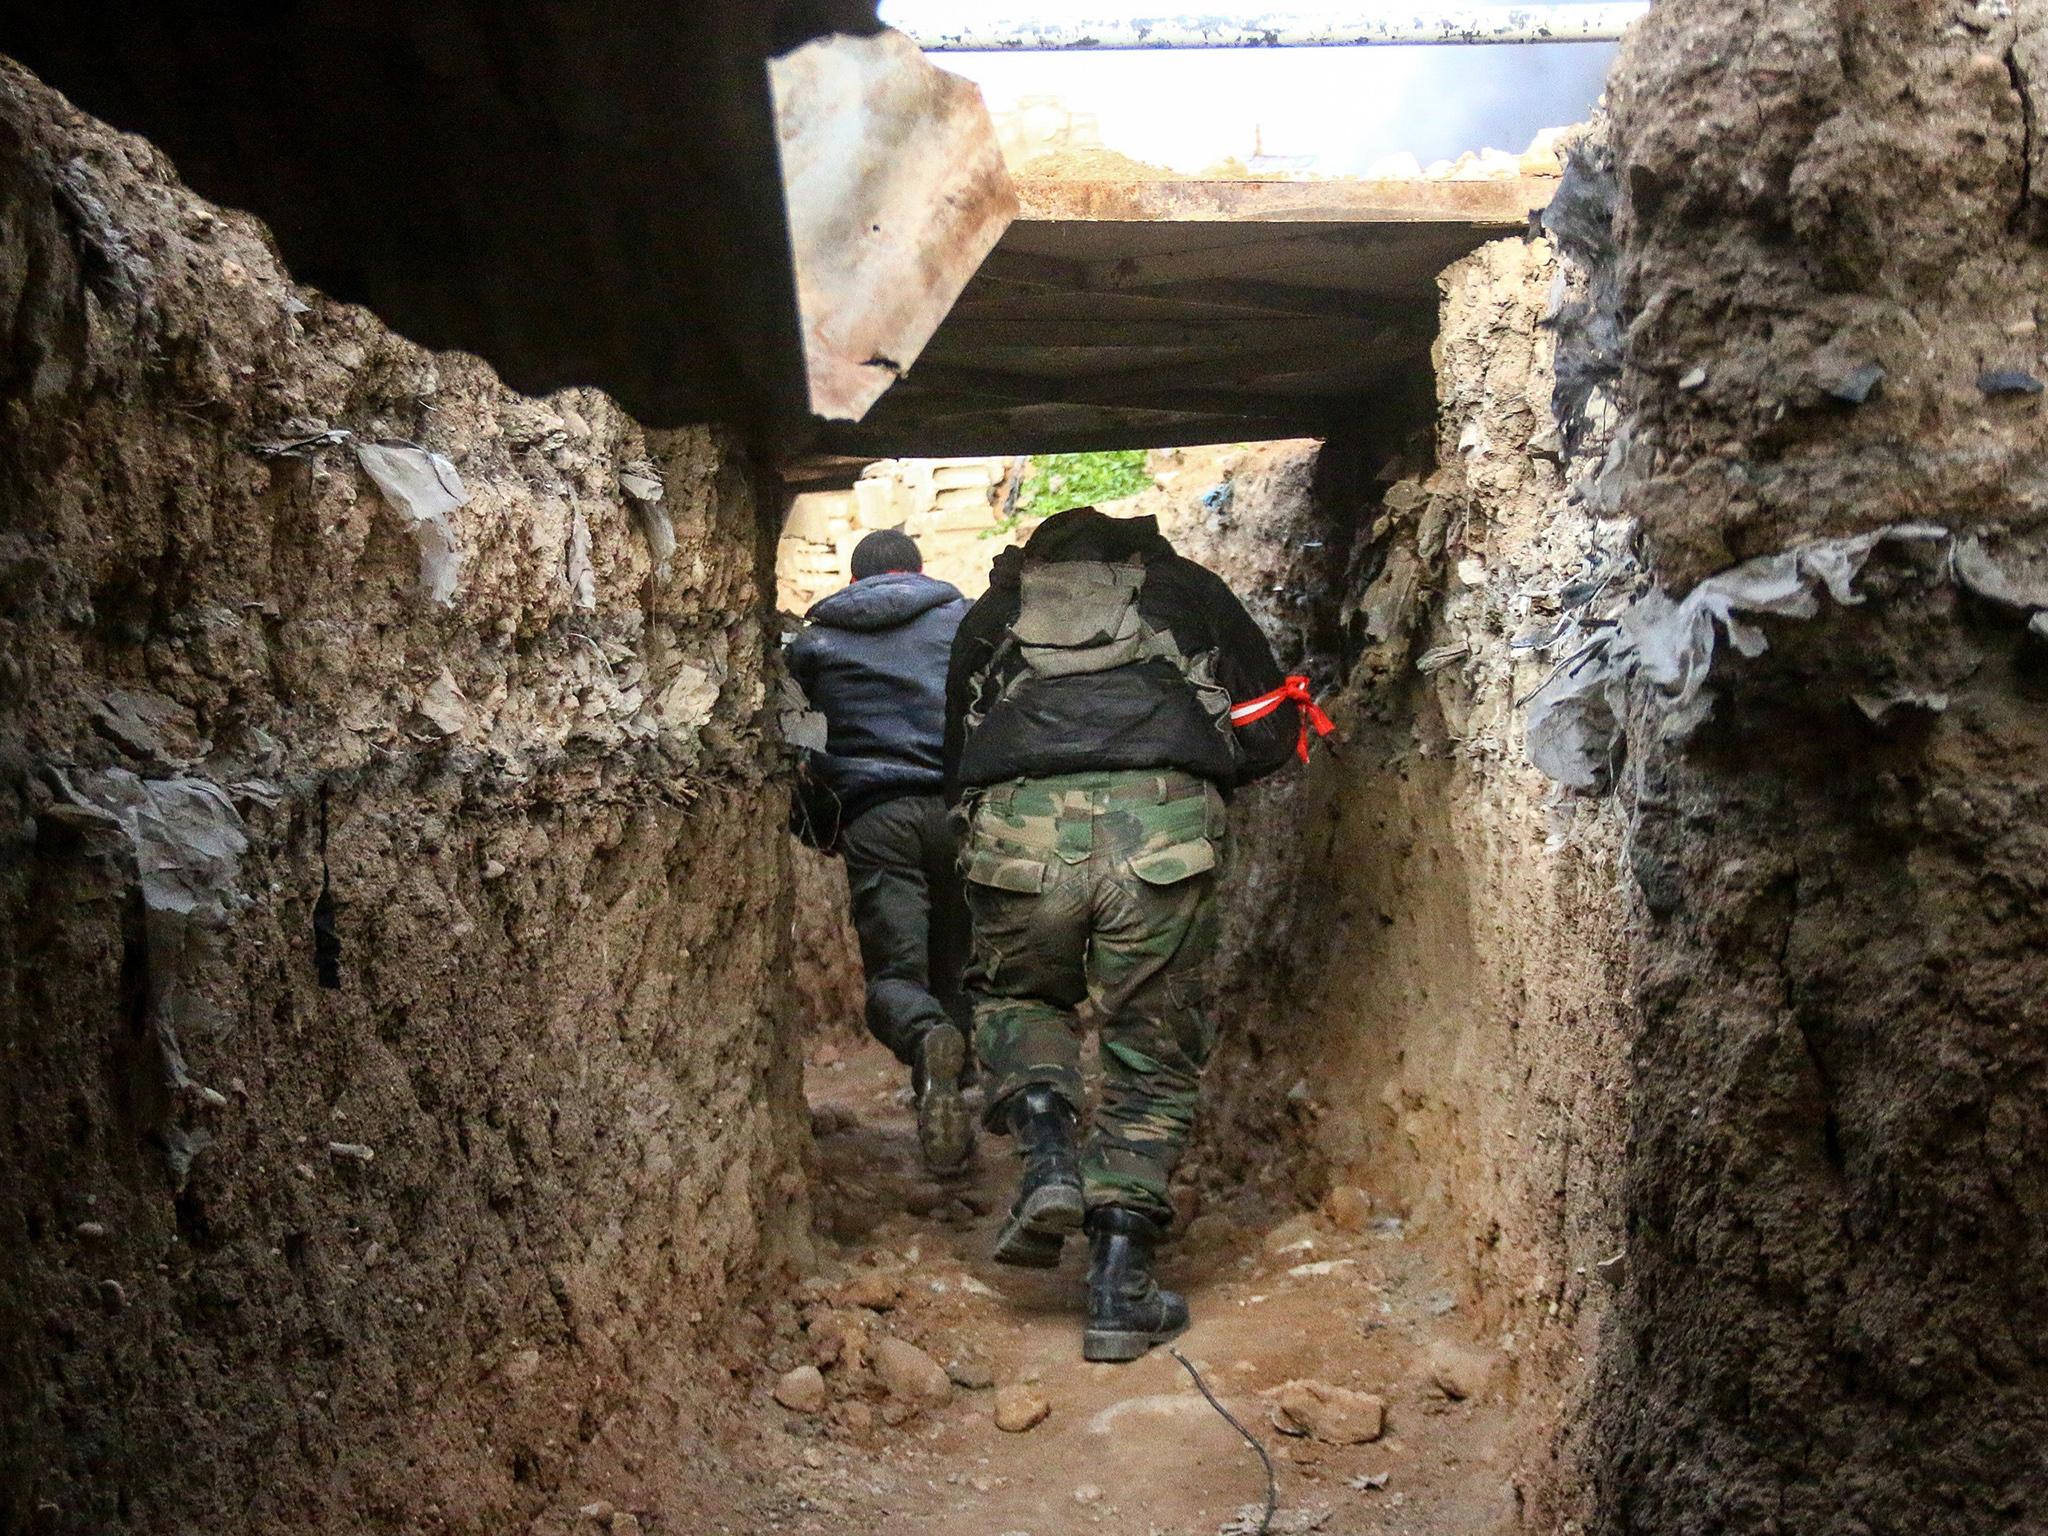 Opposition forces members break through in a tunnel as clashes between opposition forces and Assad regime forces continue in Jobar and Qabun district of Damascus